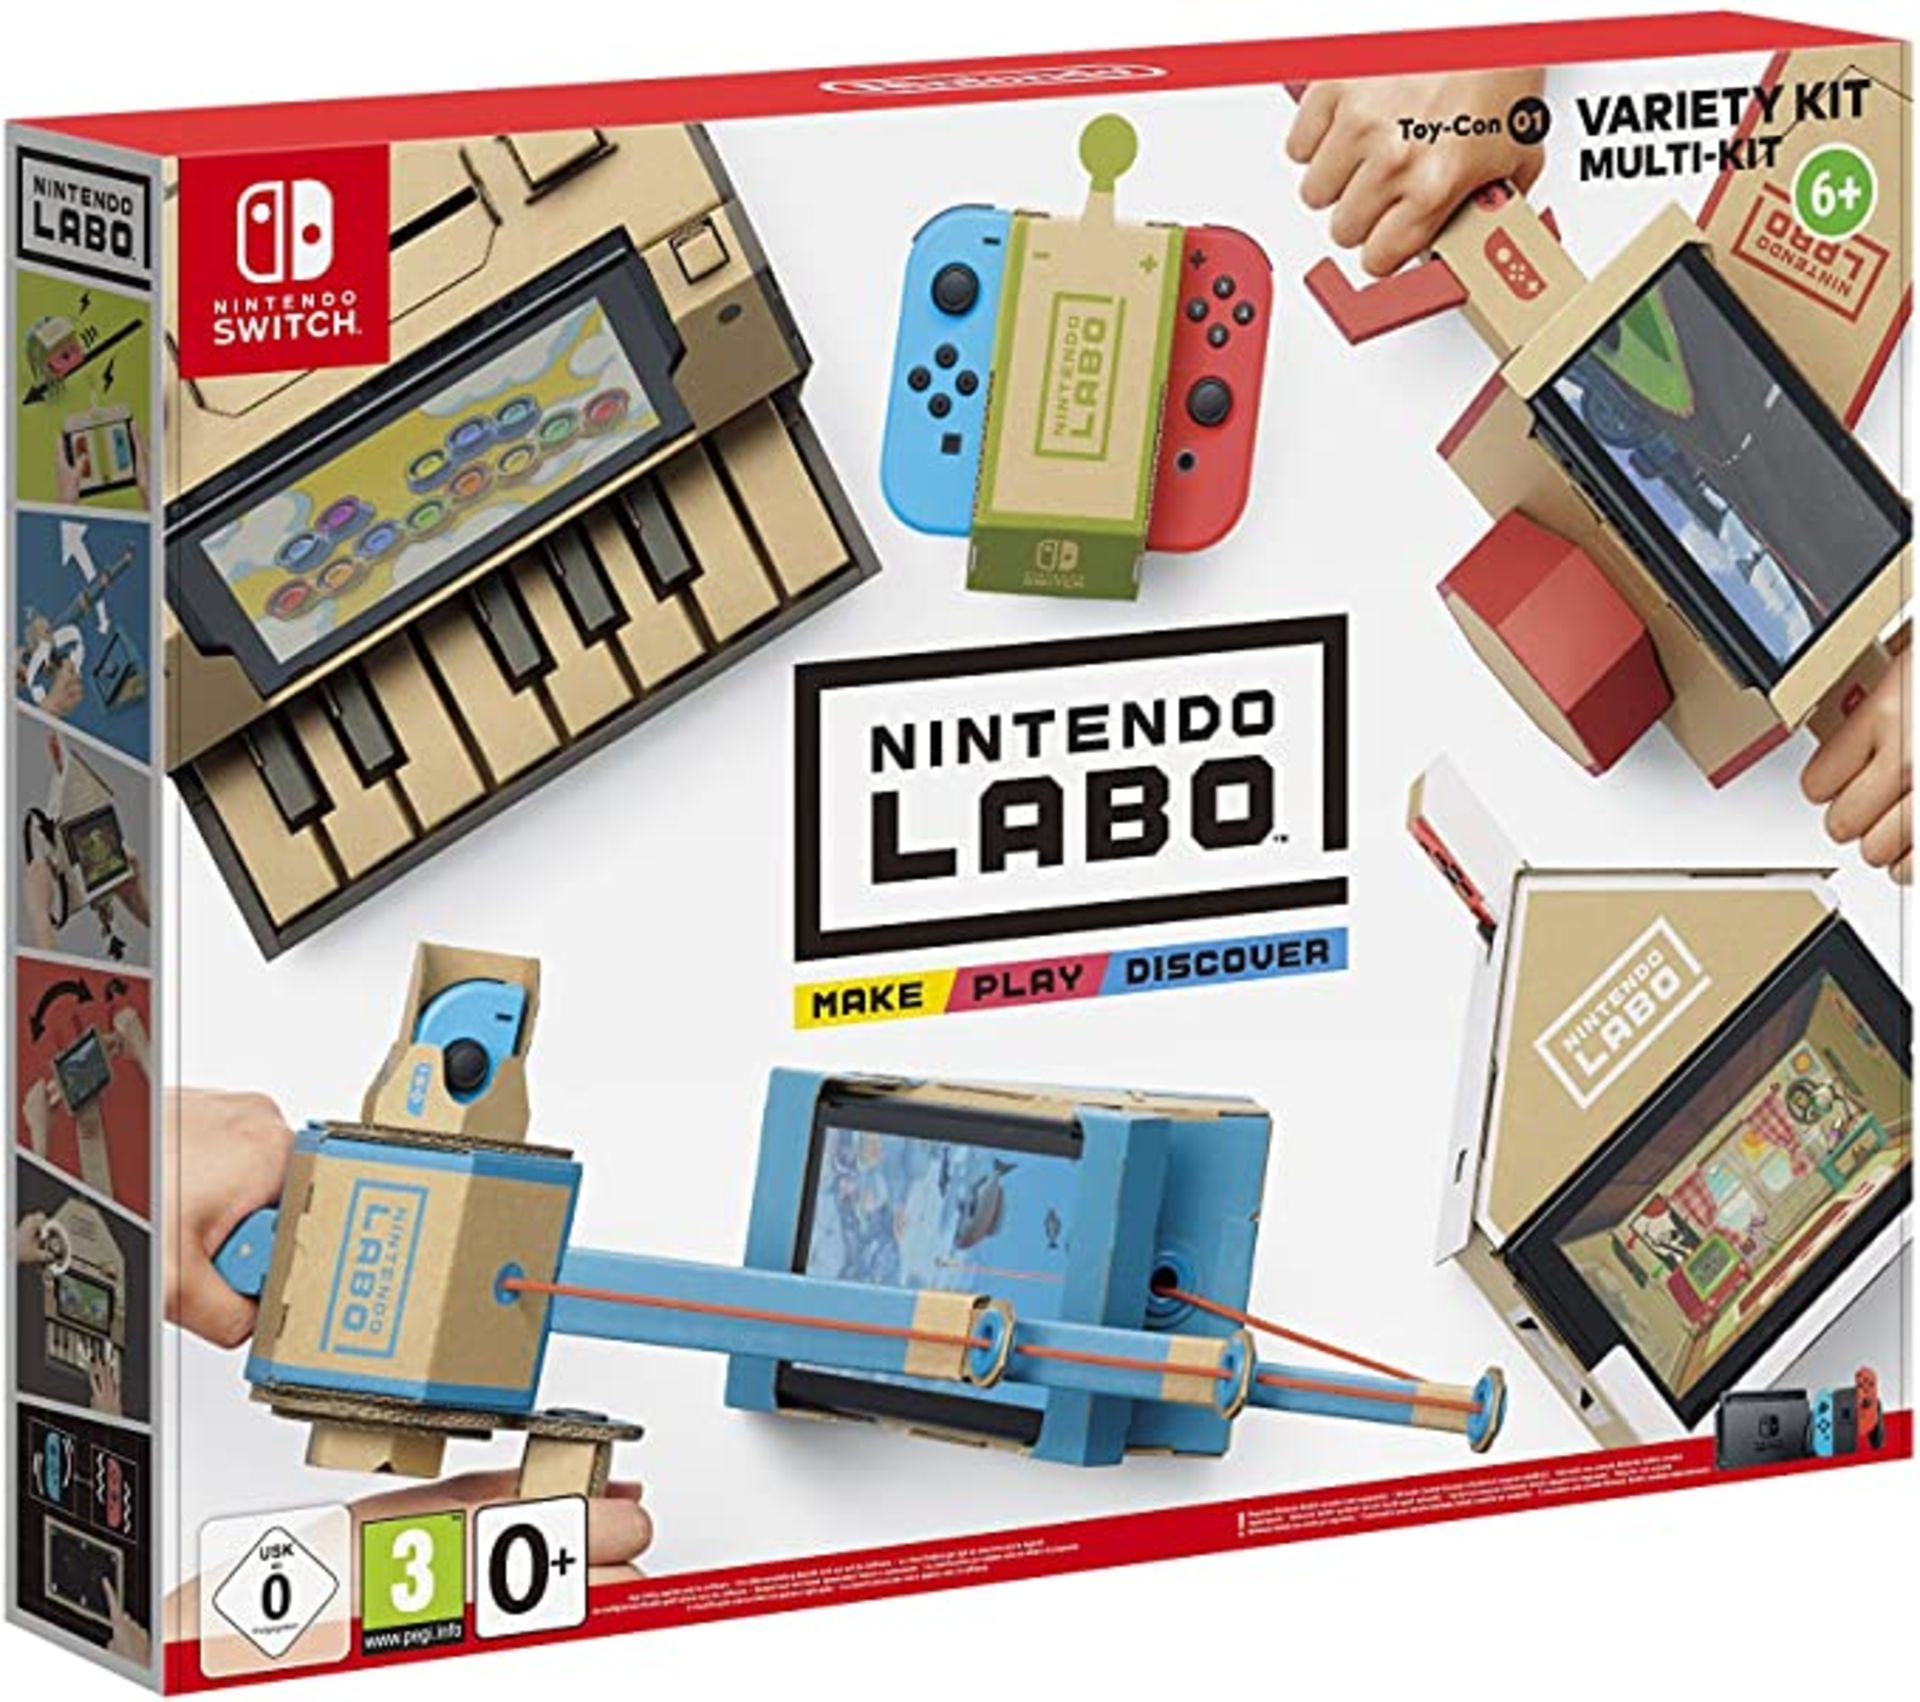 (R14A) 1x Nintendo Switch Nintendo Labo Toy-Con 01 (Variety Kit Multi-Kit). RRP £48.99. New, Sealed - Image 2 of 4